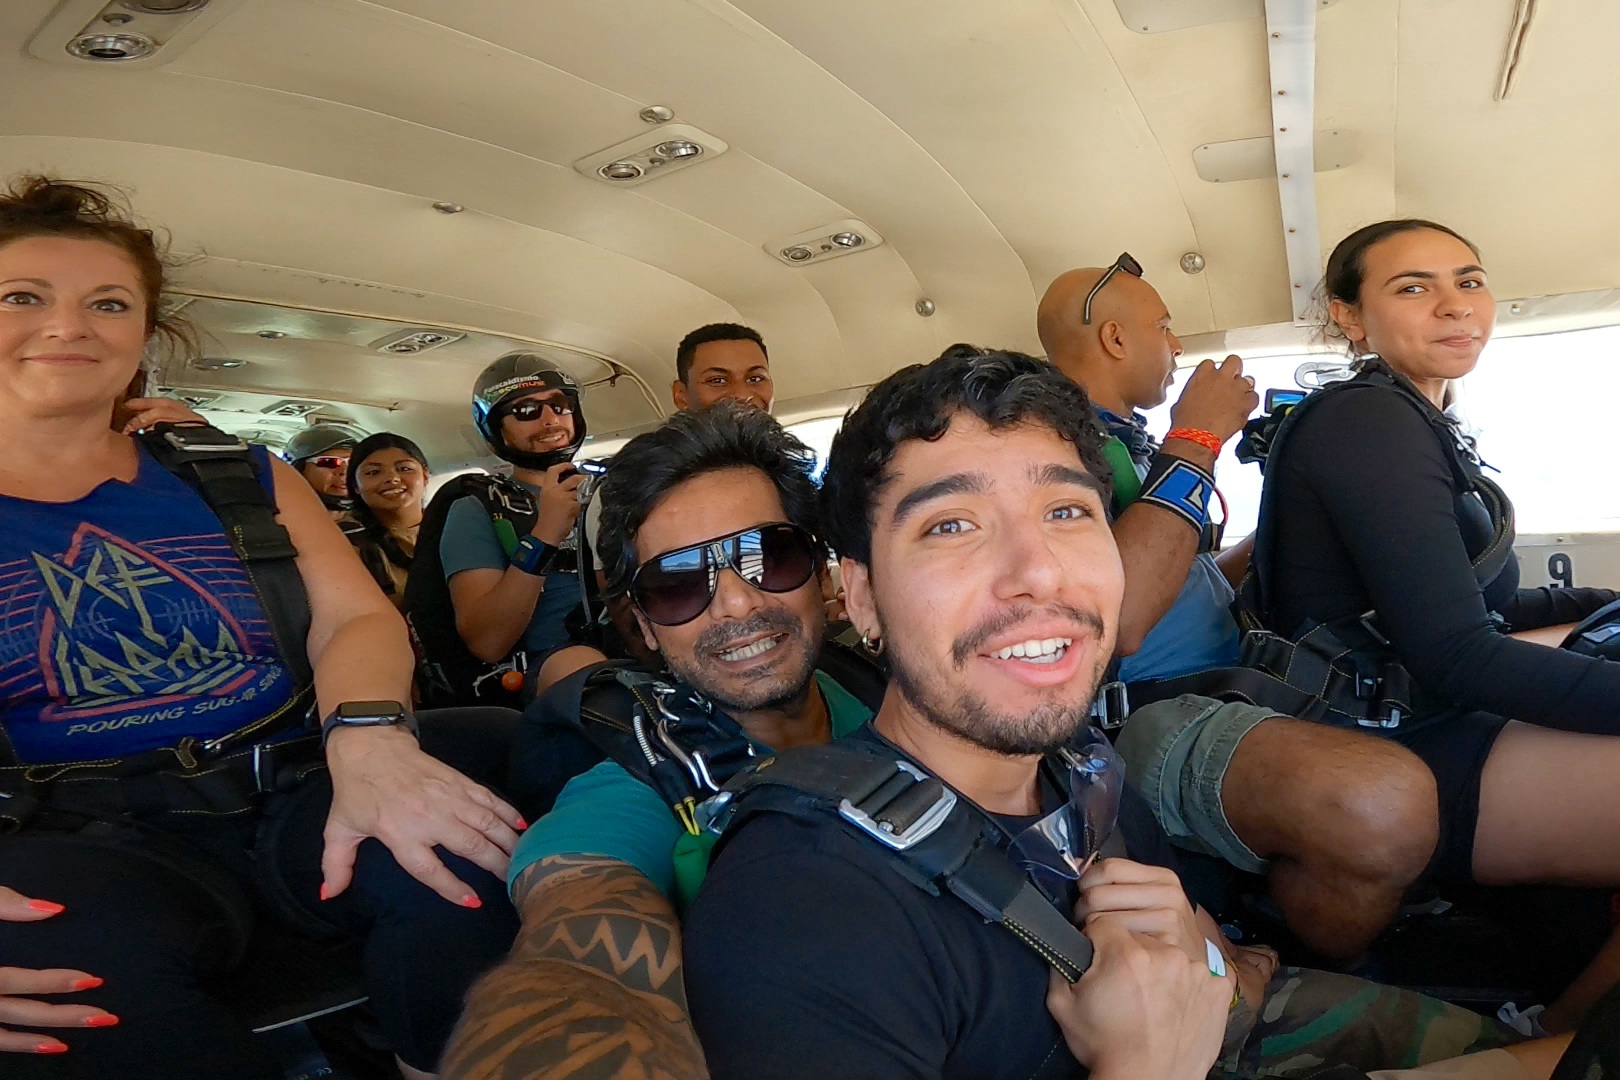 Inside the airplane before skydiving in New York